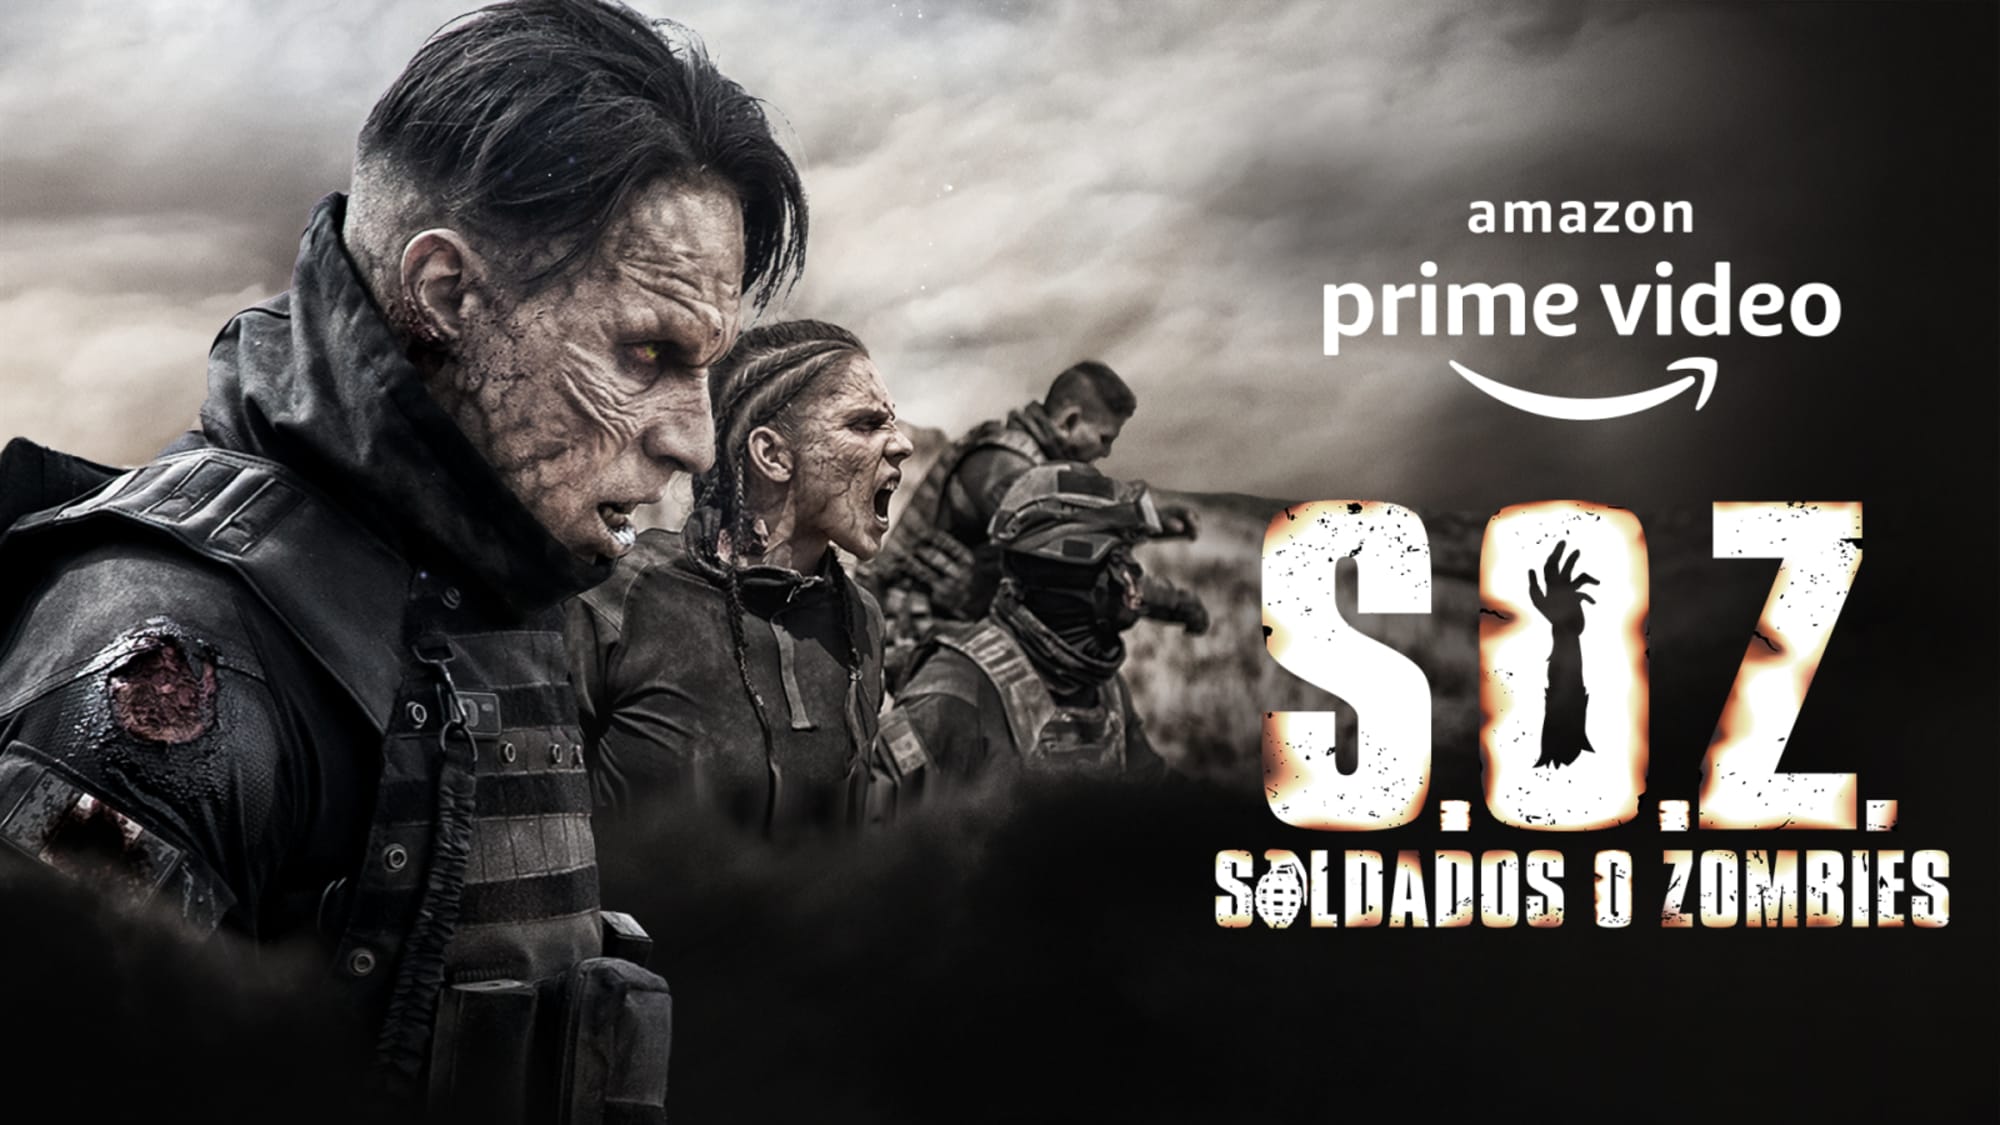 When is S.O.Z. Soldiers or Zombies Season 2 coming to Amazon?